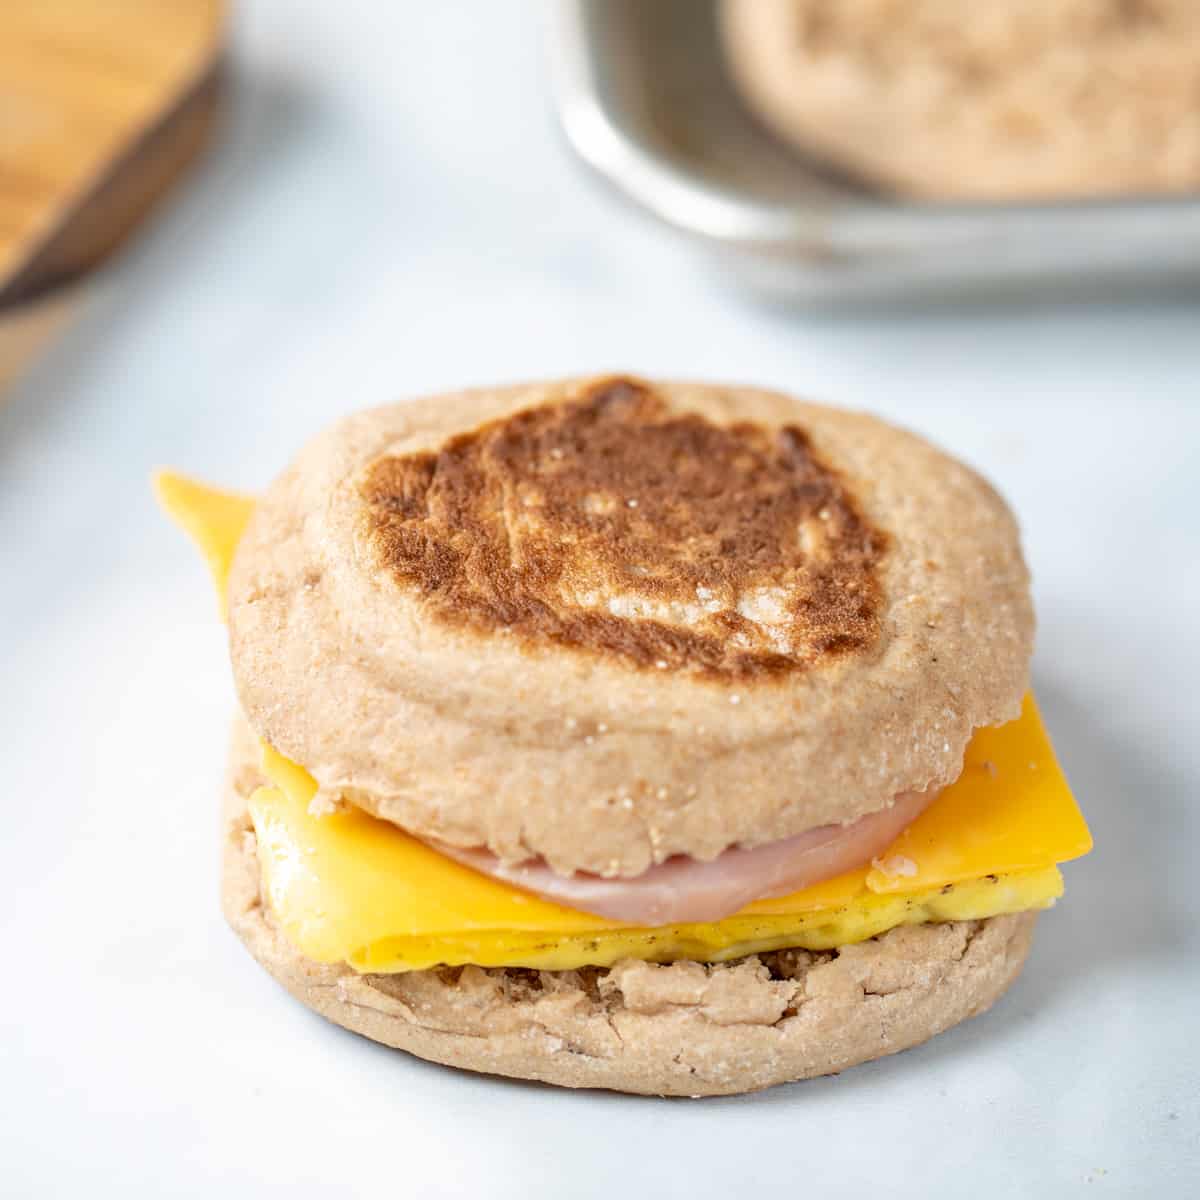 Homemade Egg McMuffins have never been more convenient